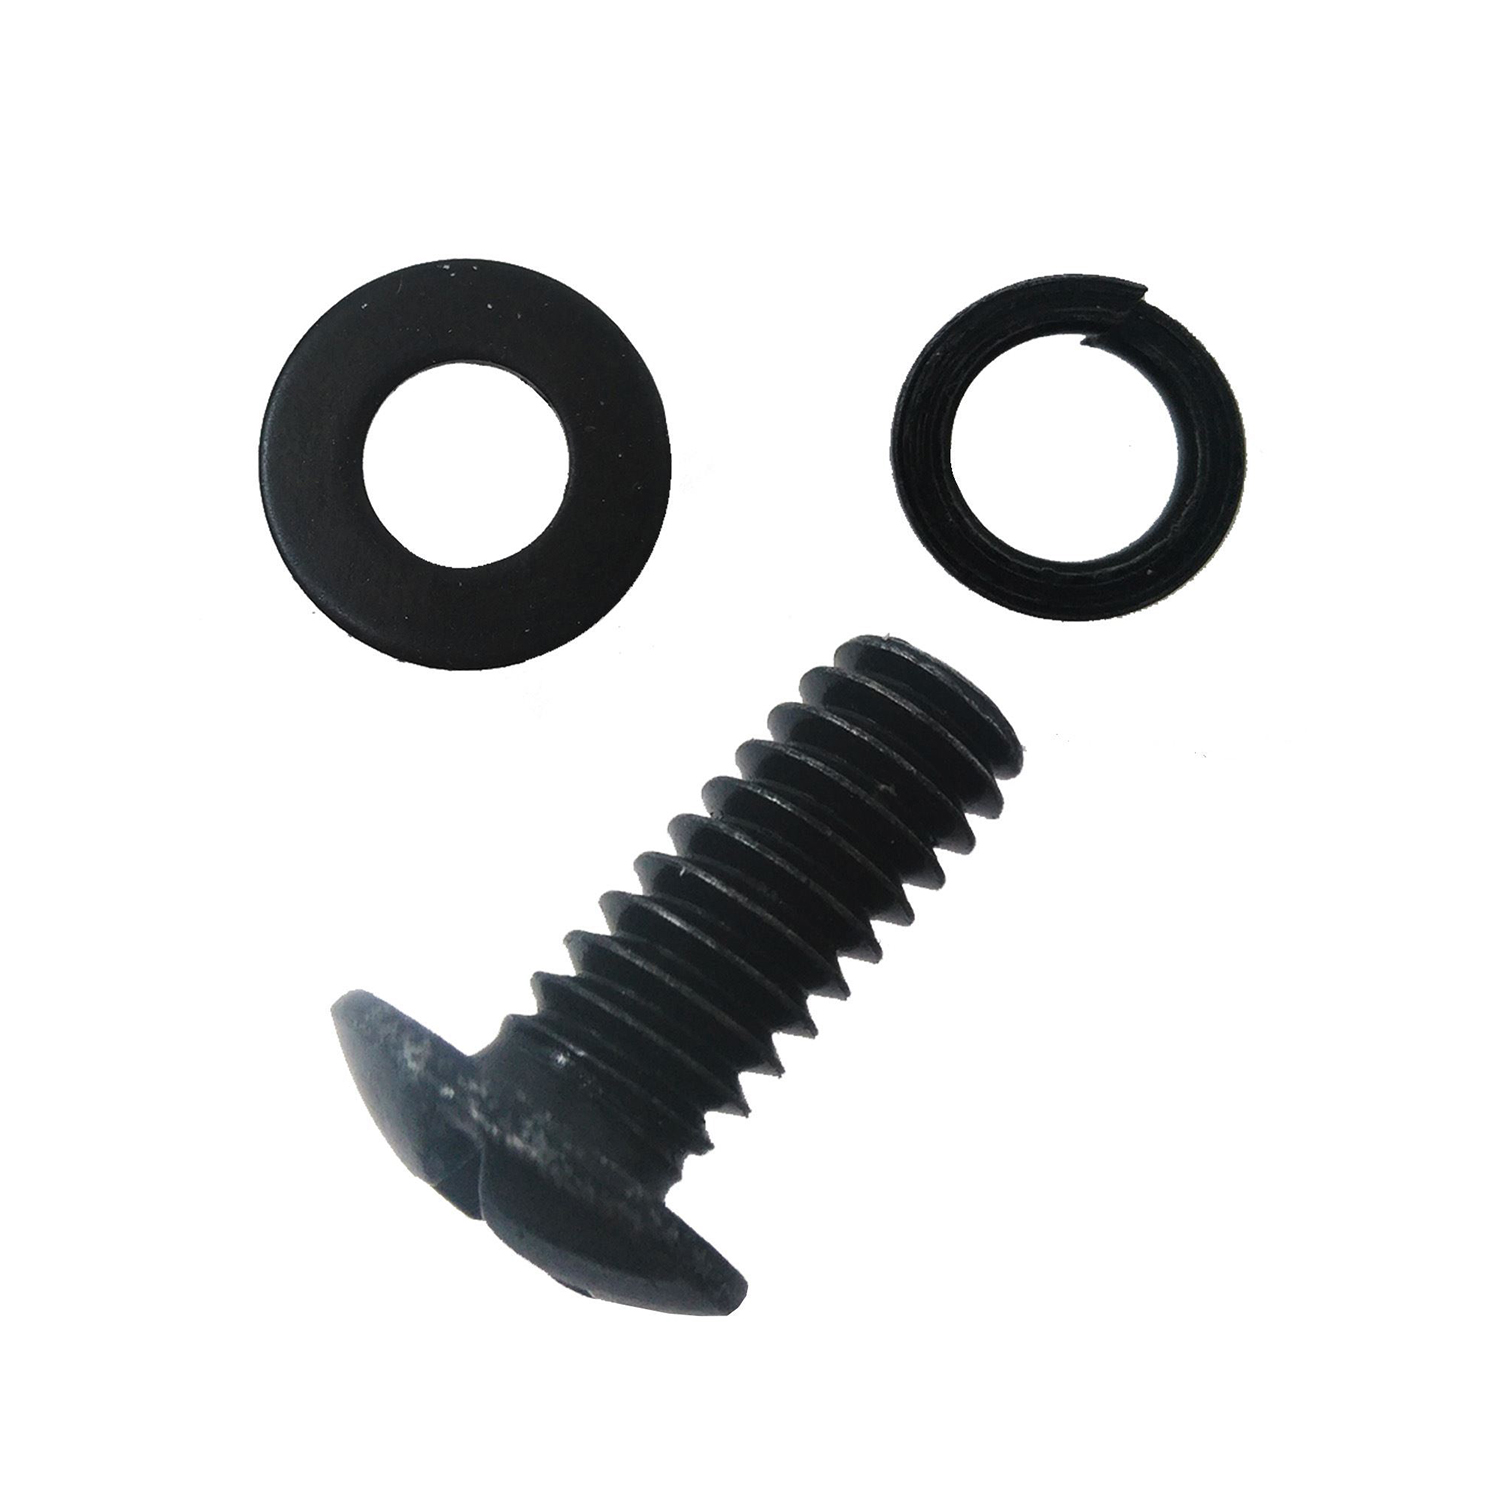 Screw, Washer & Locking Washer Kit for Pit Boss Pellet Grills-YAOAWE